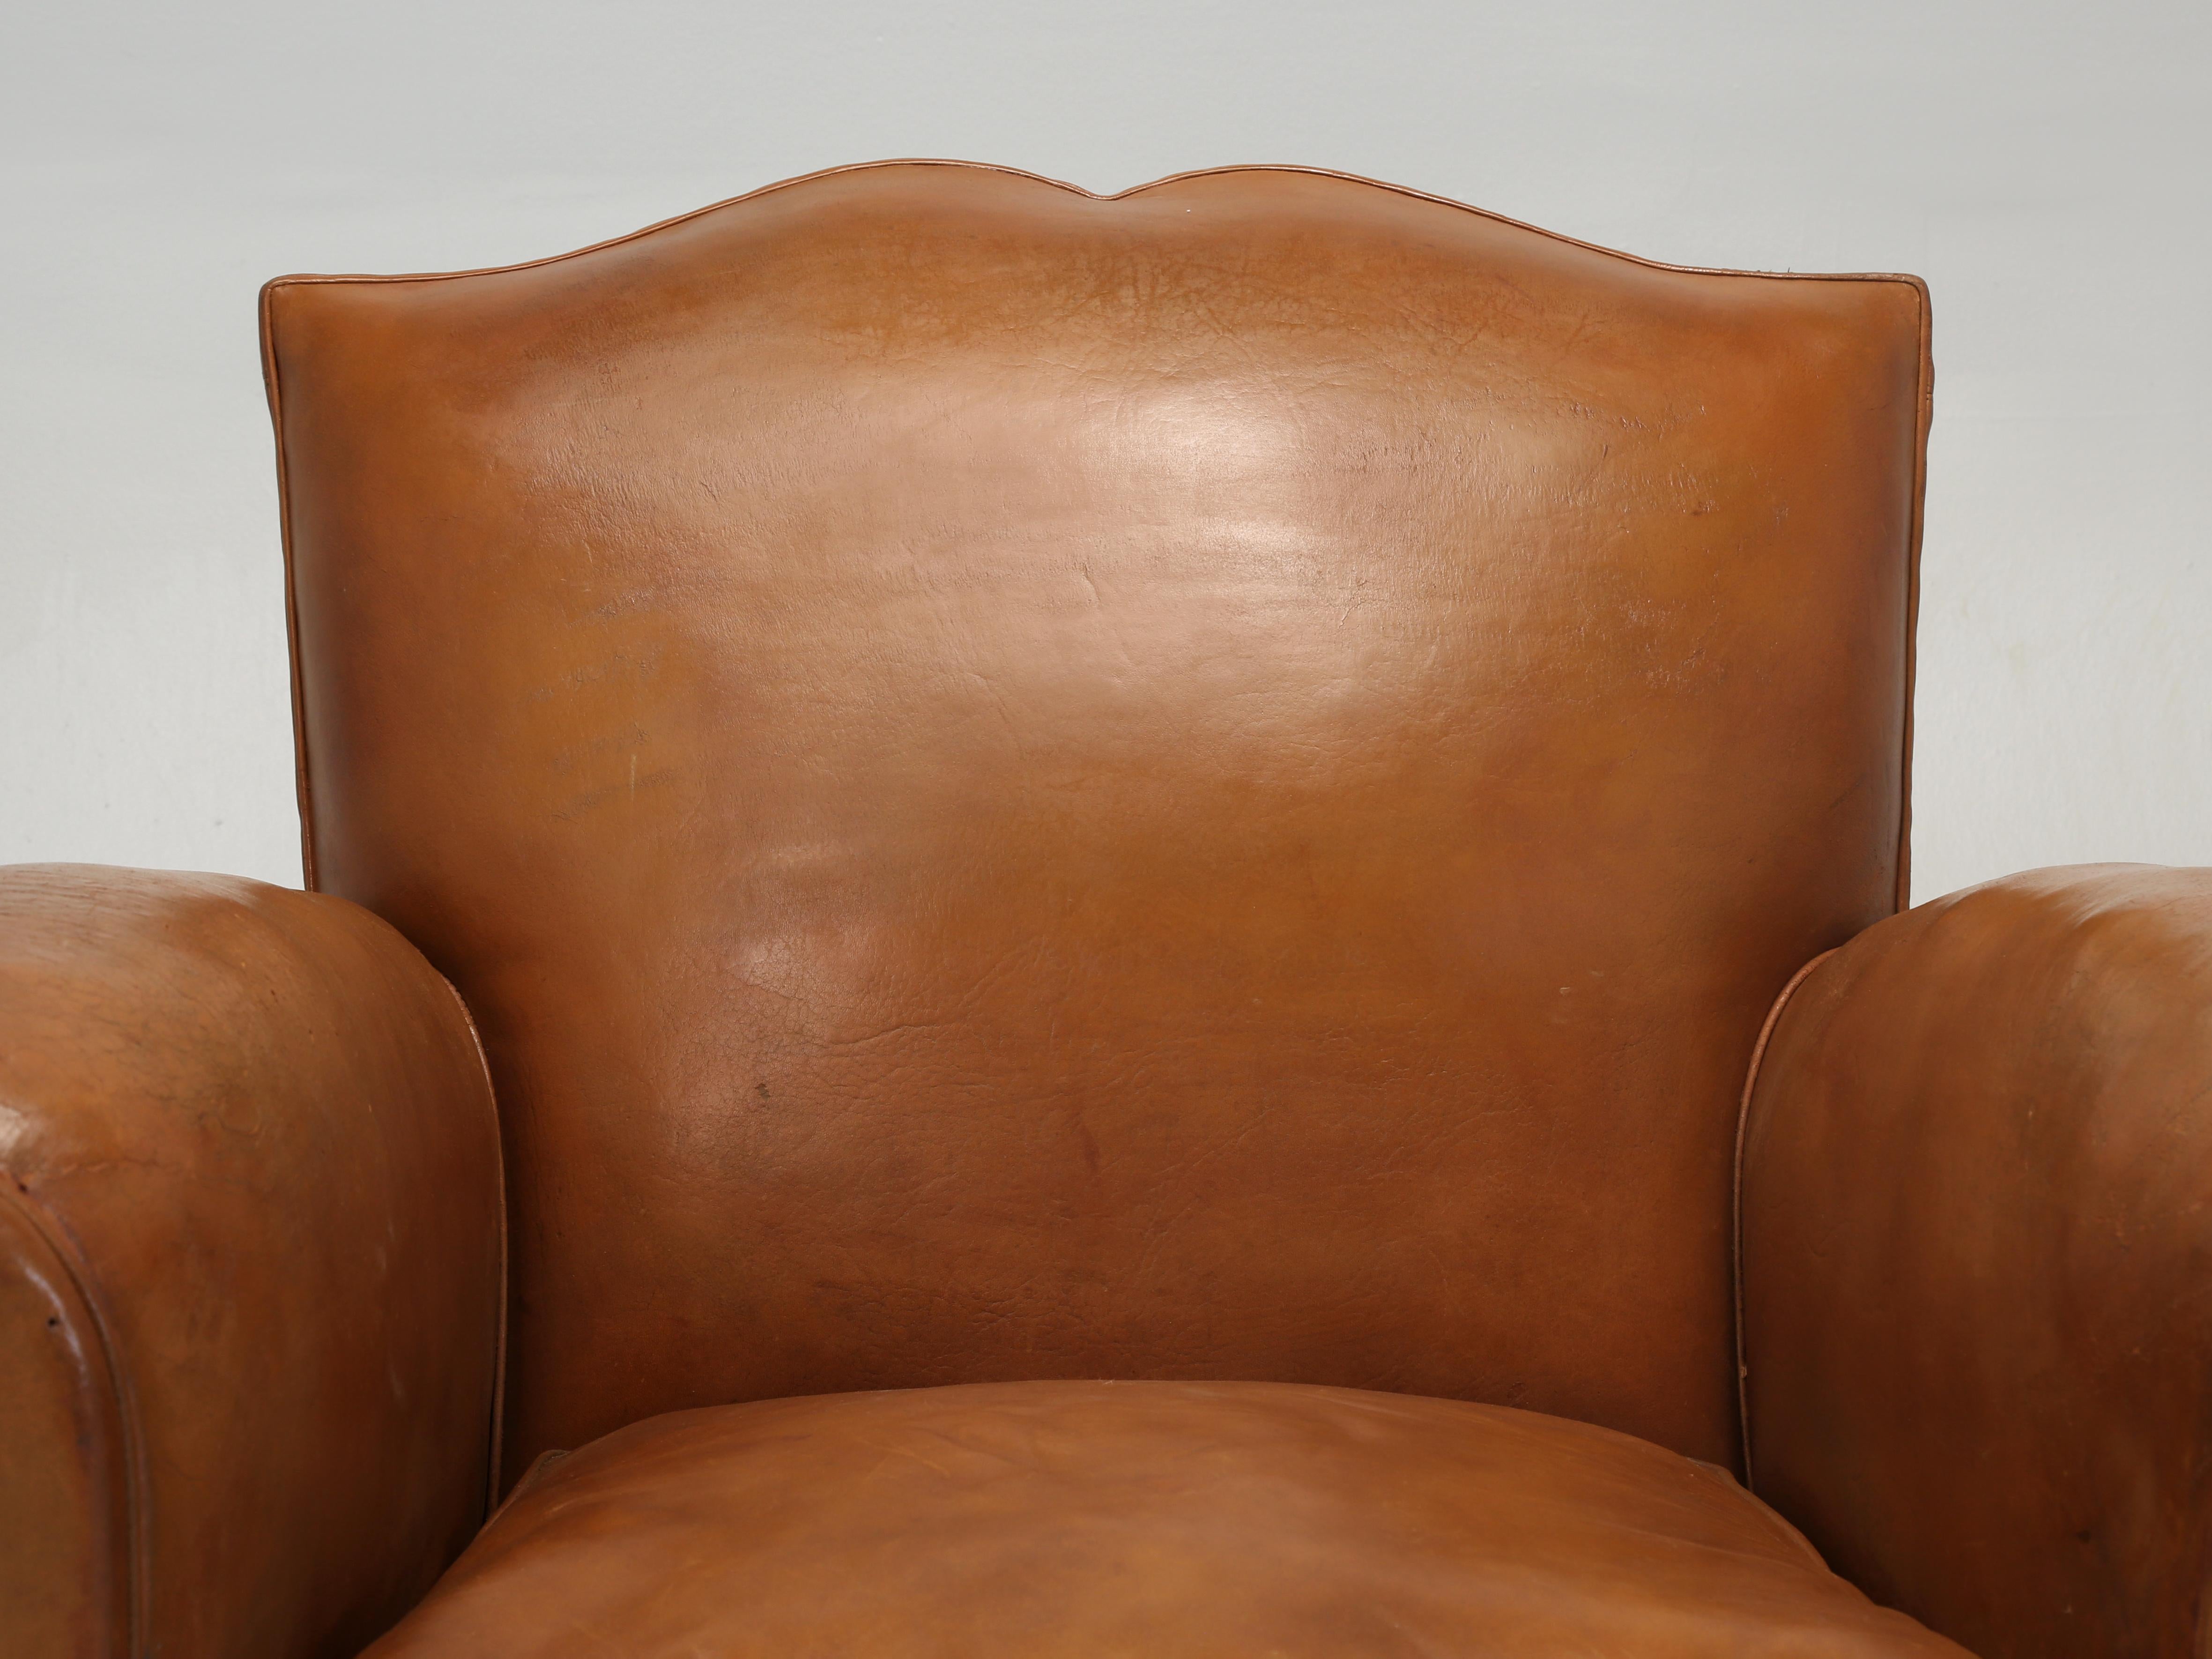 French Art Deco Moustache Style Club Chairs from the 1930s. If there ever was an Iconic French Art Deco Leather Club Chair, then it must be the Classic Moustache Back French Leather Club Chair that epitomizes the Art Deco Period. Our inhouse Old